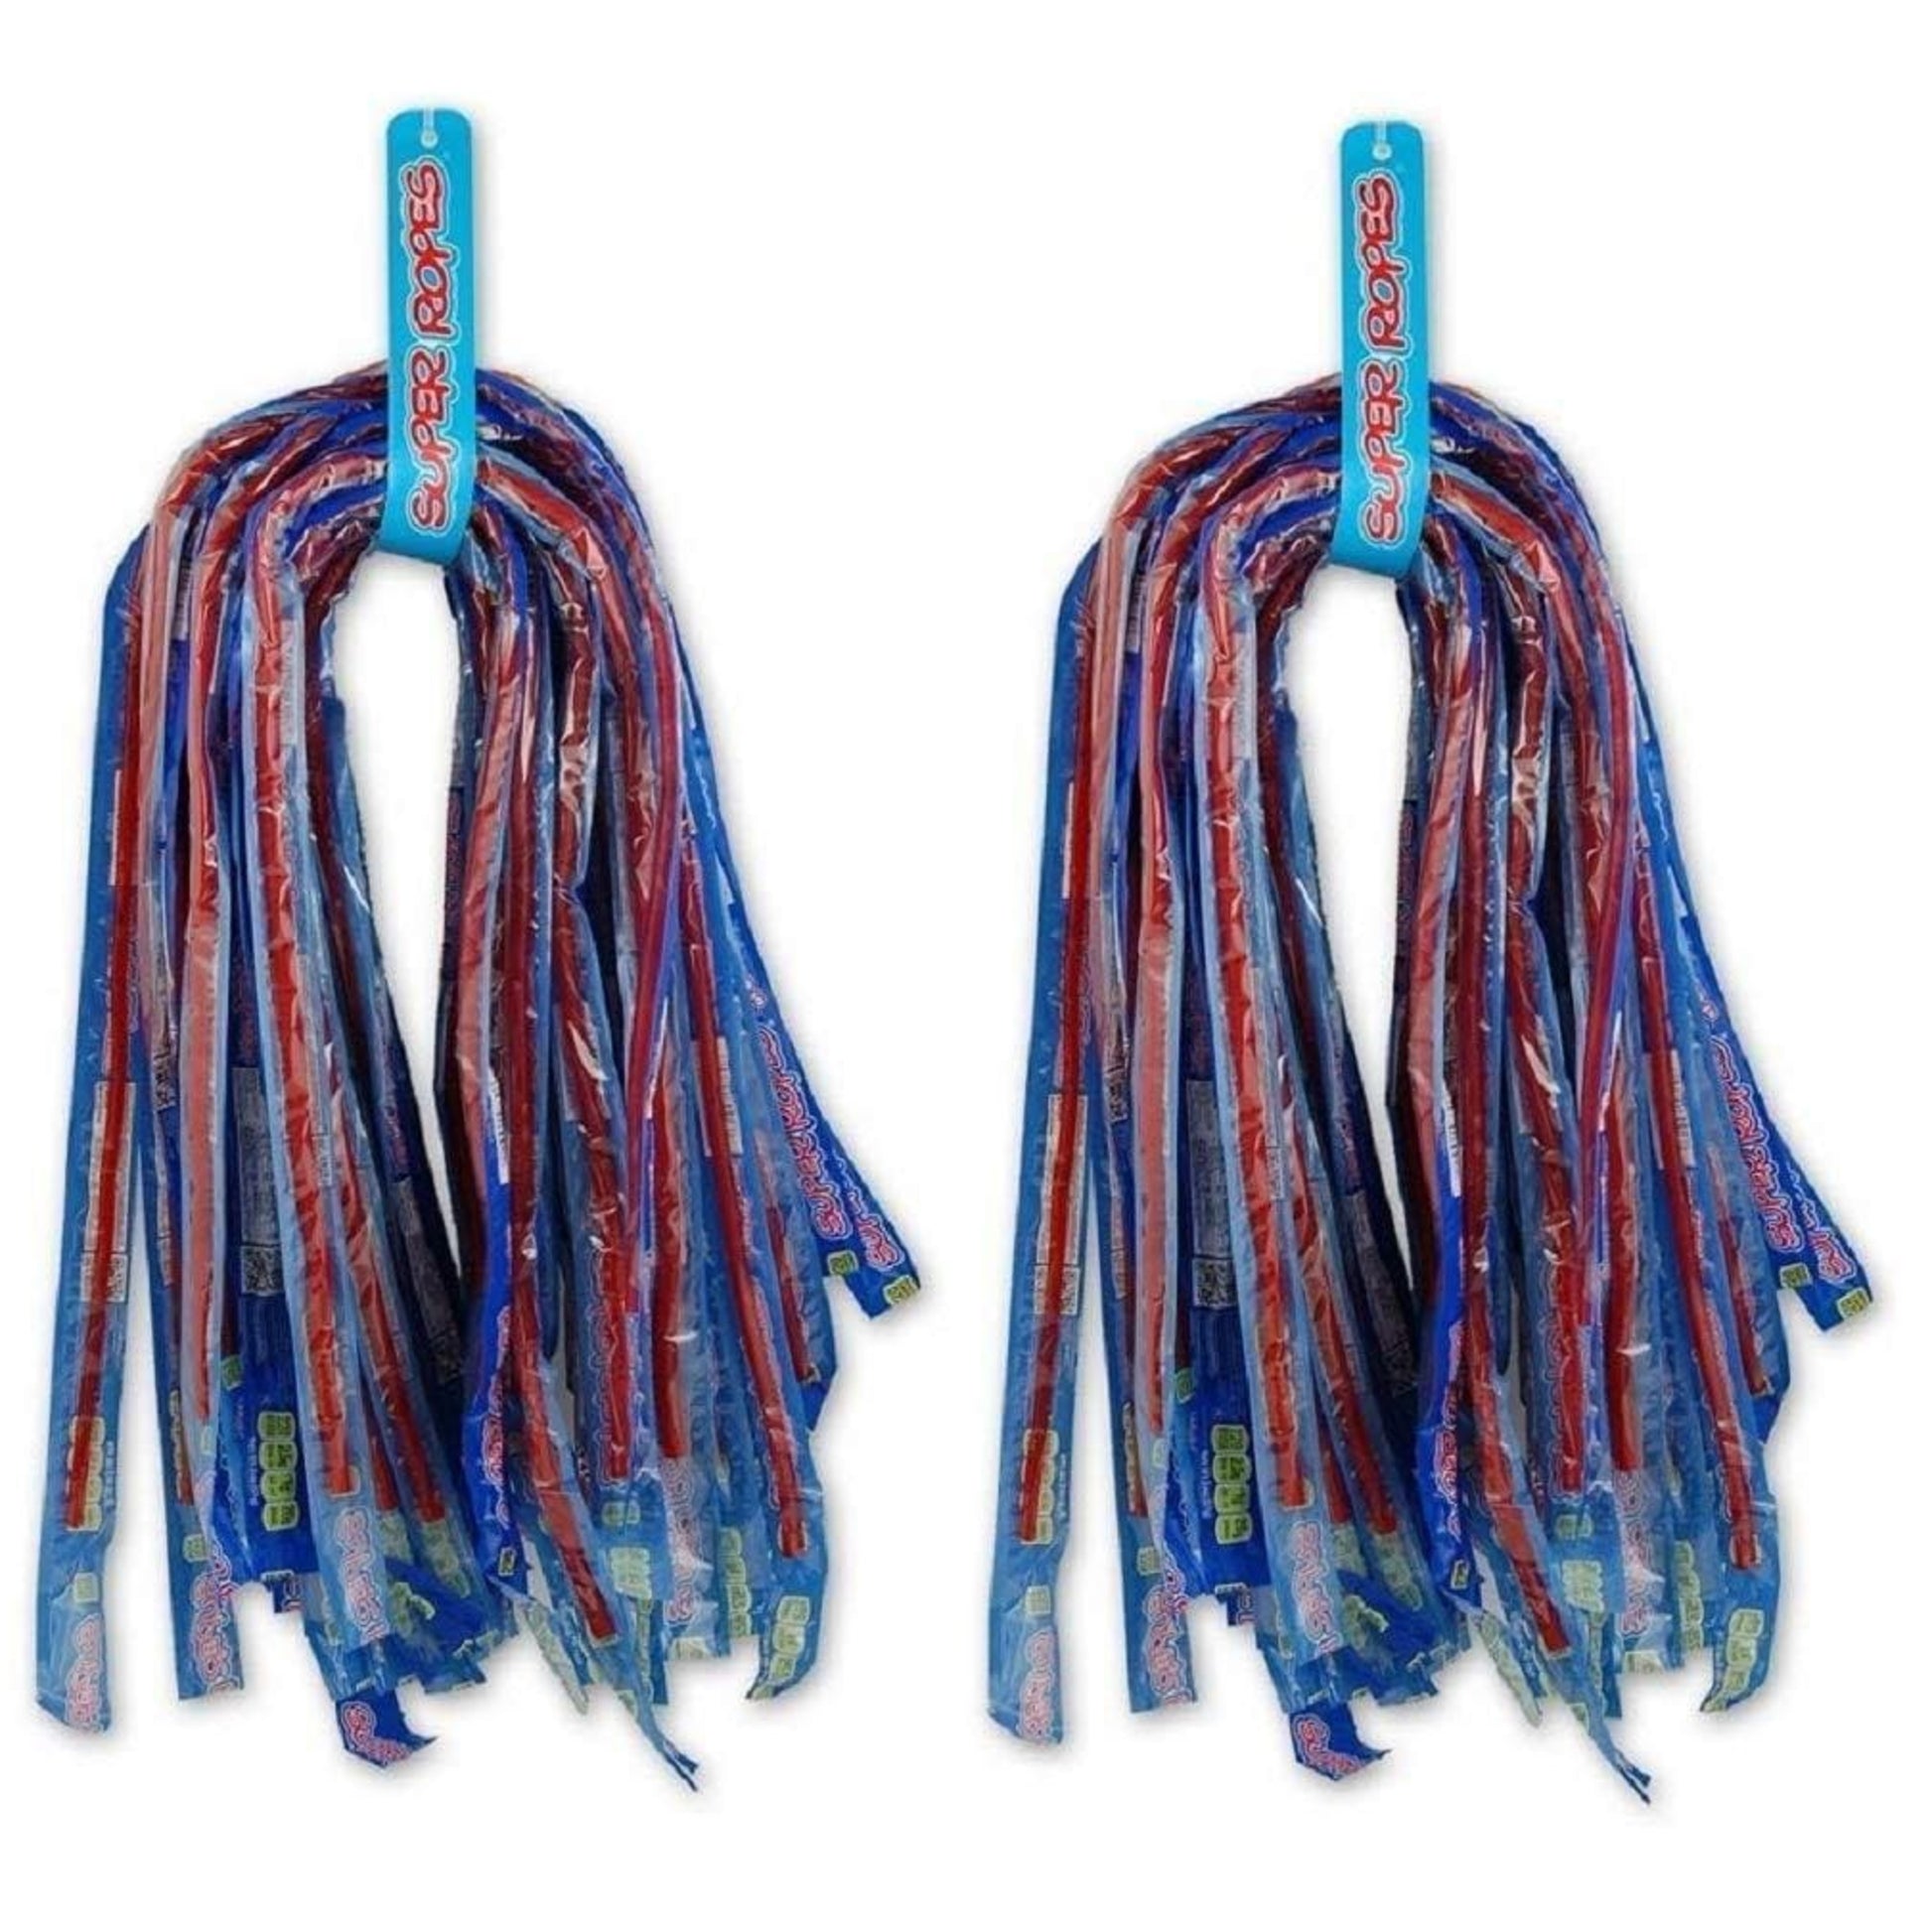 60 Pack (two 30-count Strap Packs) of SUPER ROPES licorice